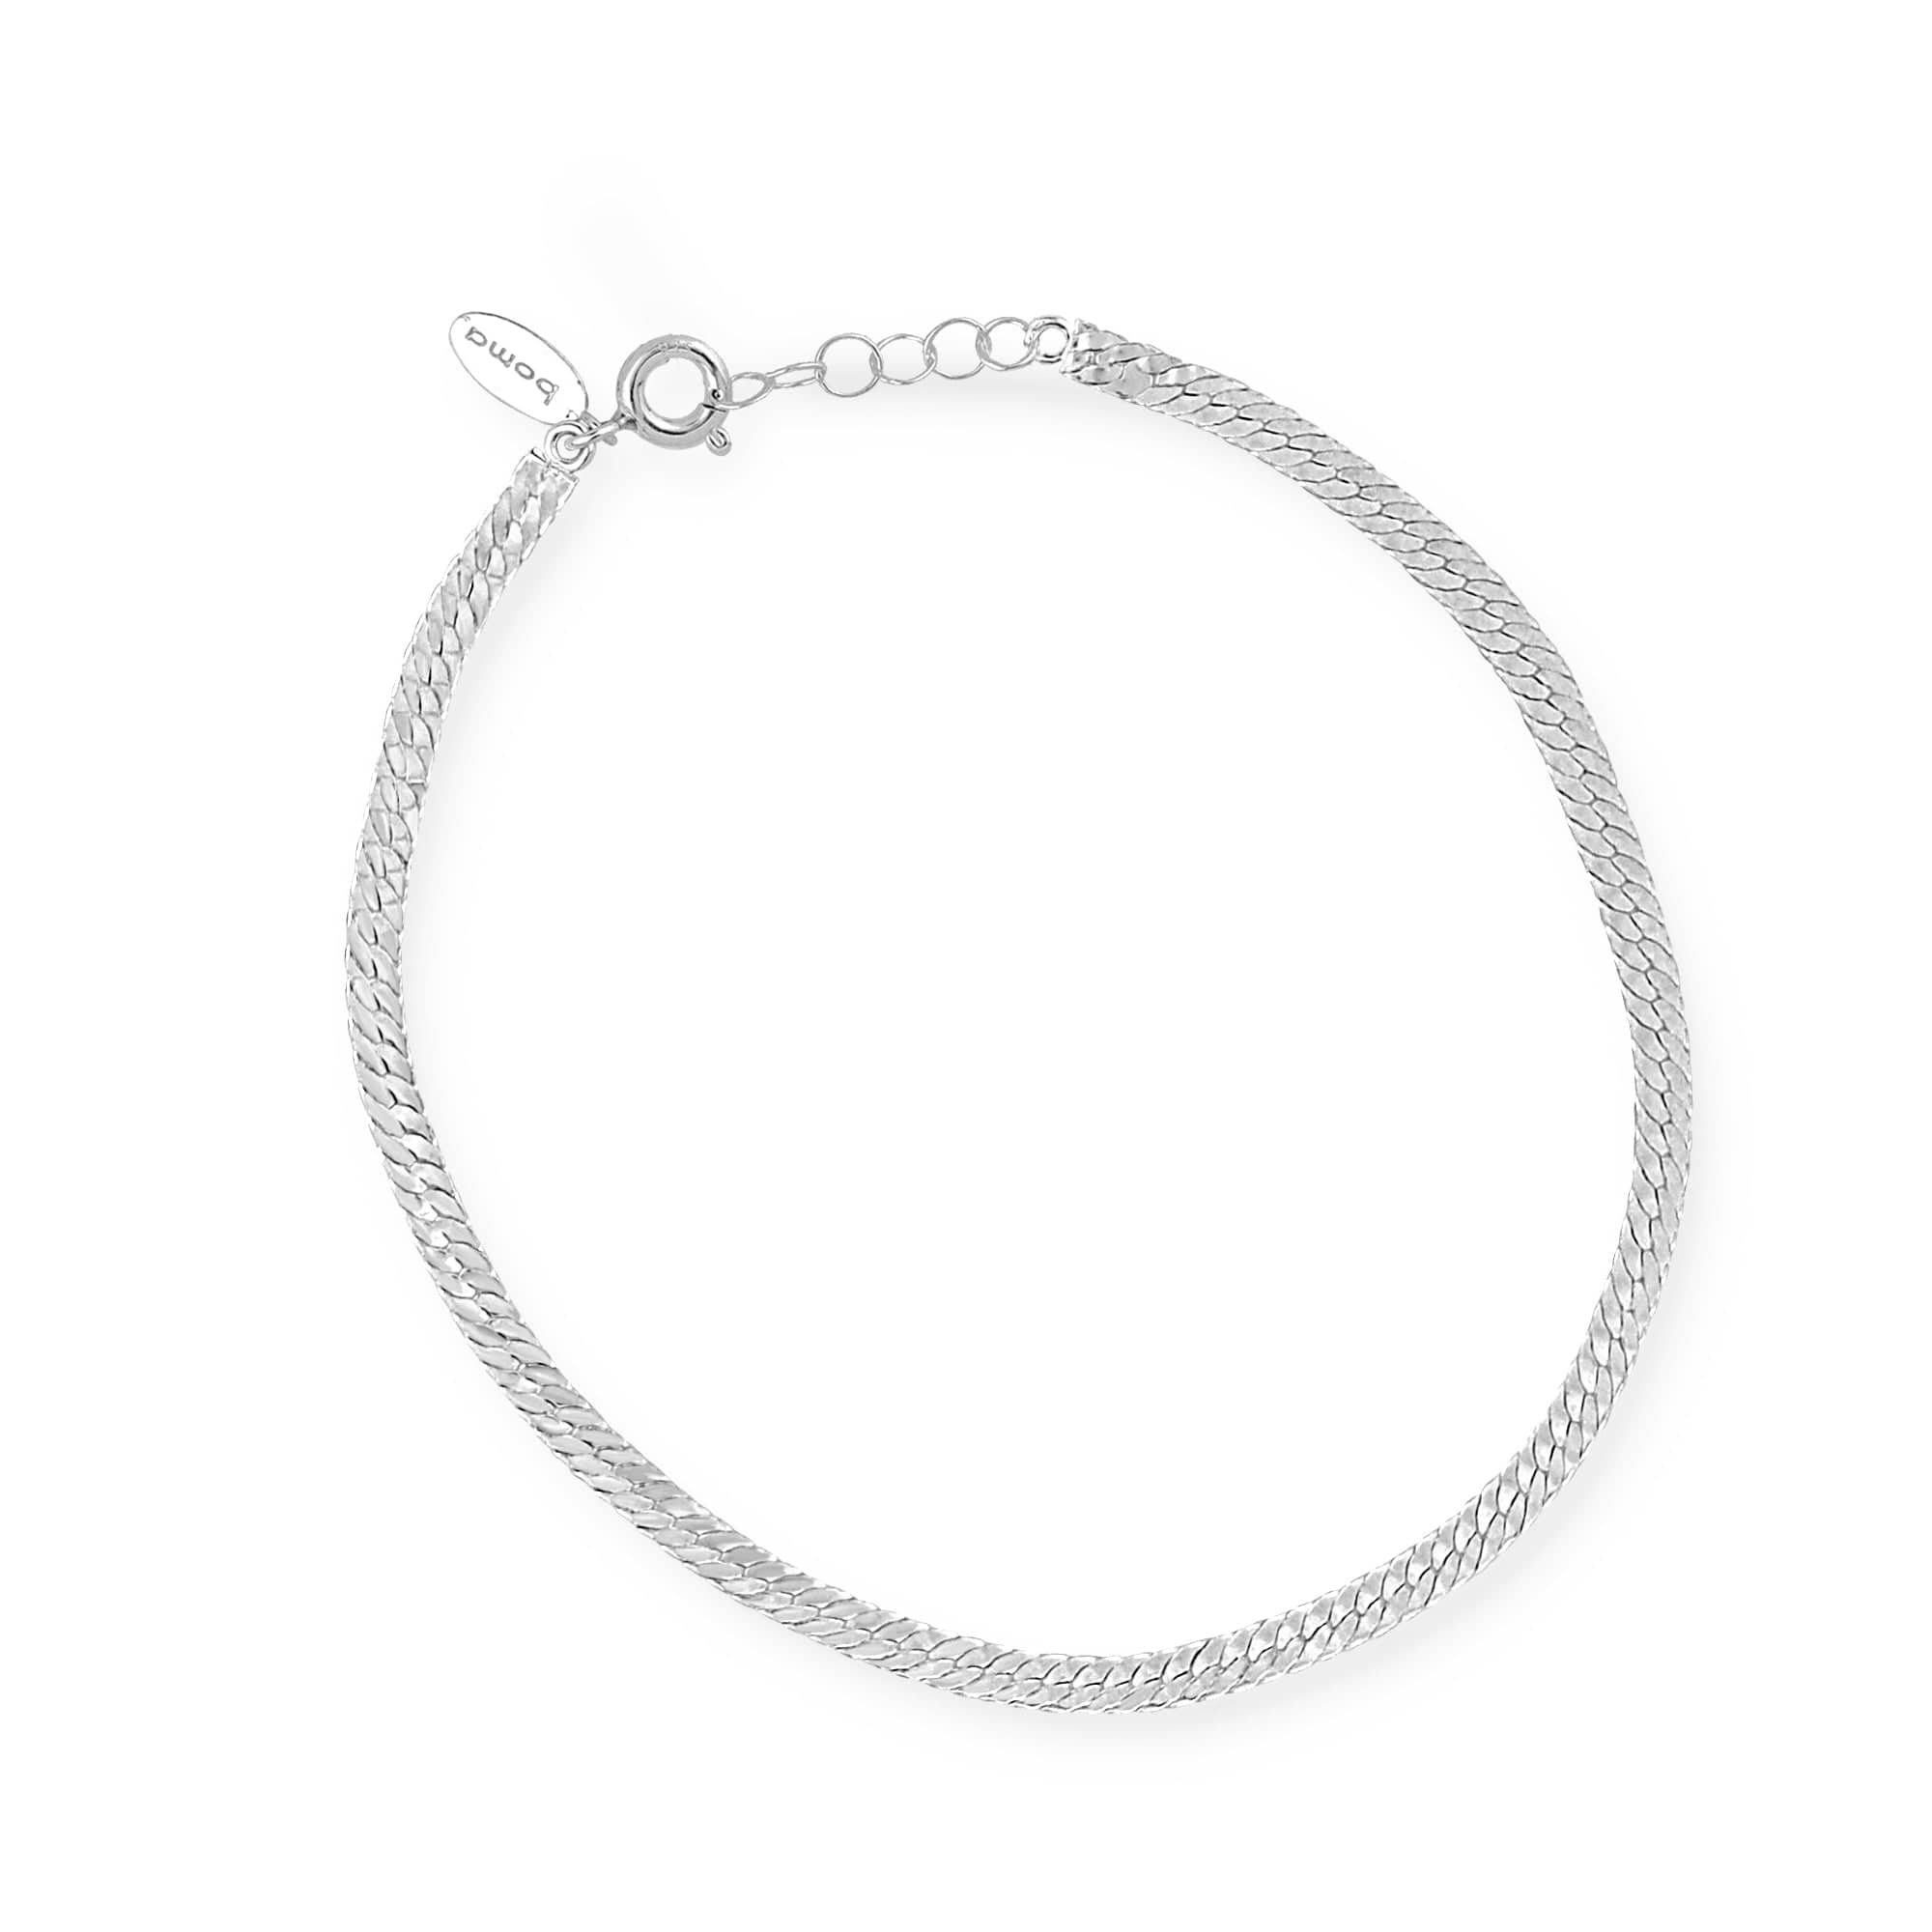 Boma Jewelry Anklets Herringbone Chain Anklet 9"